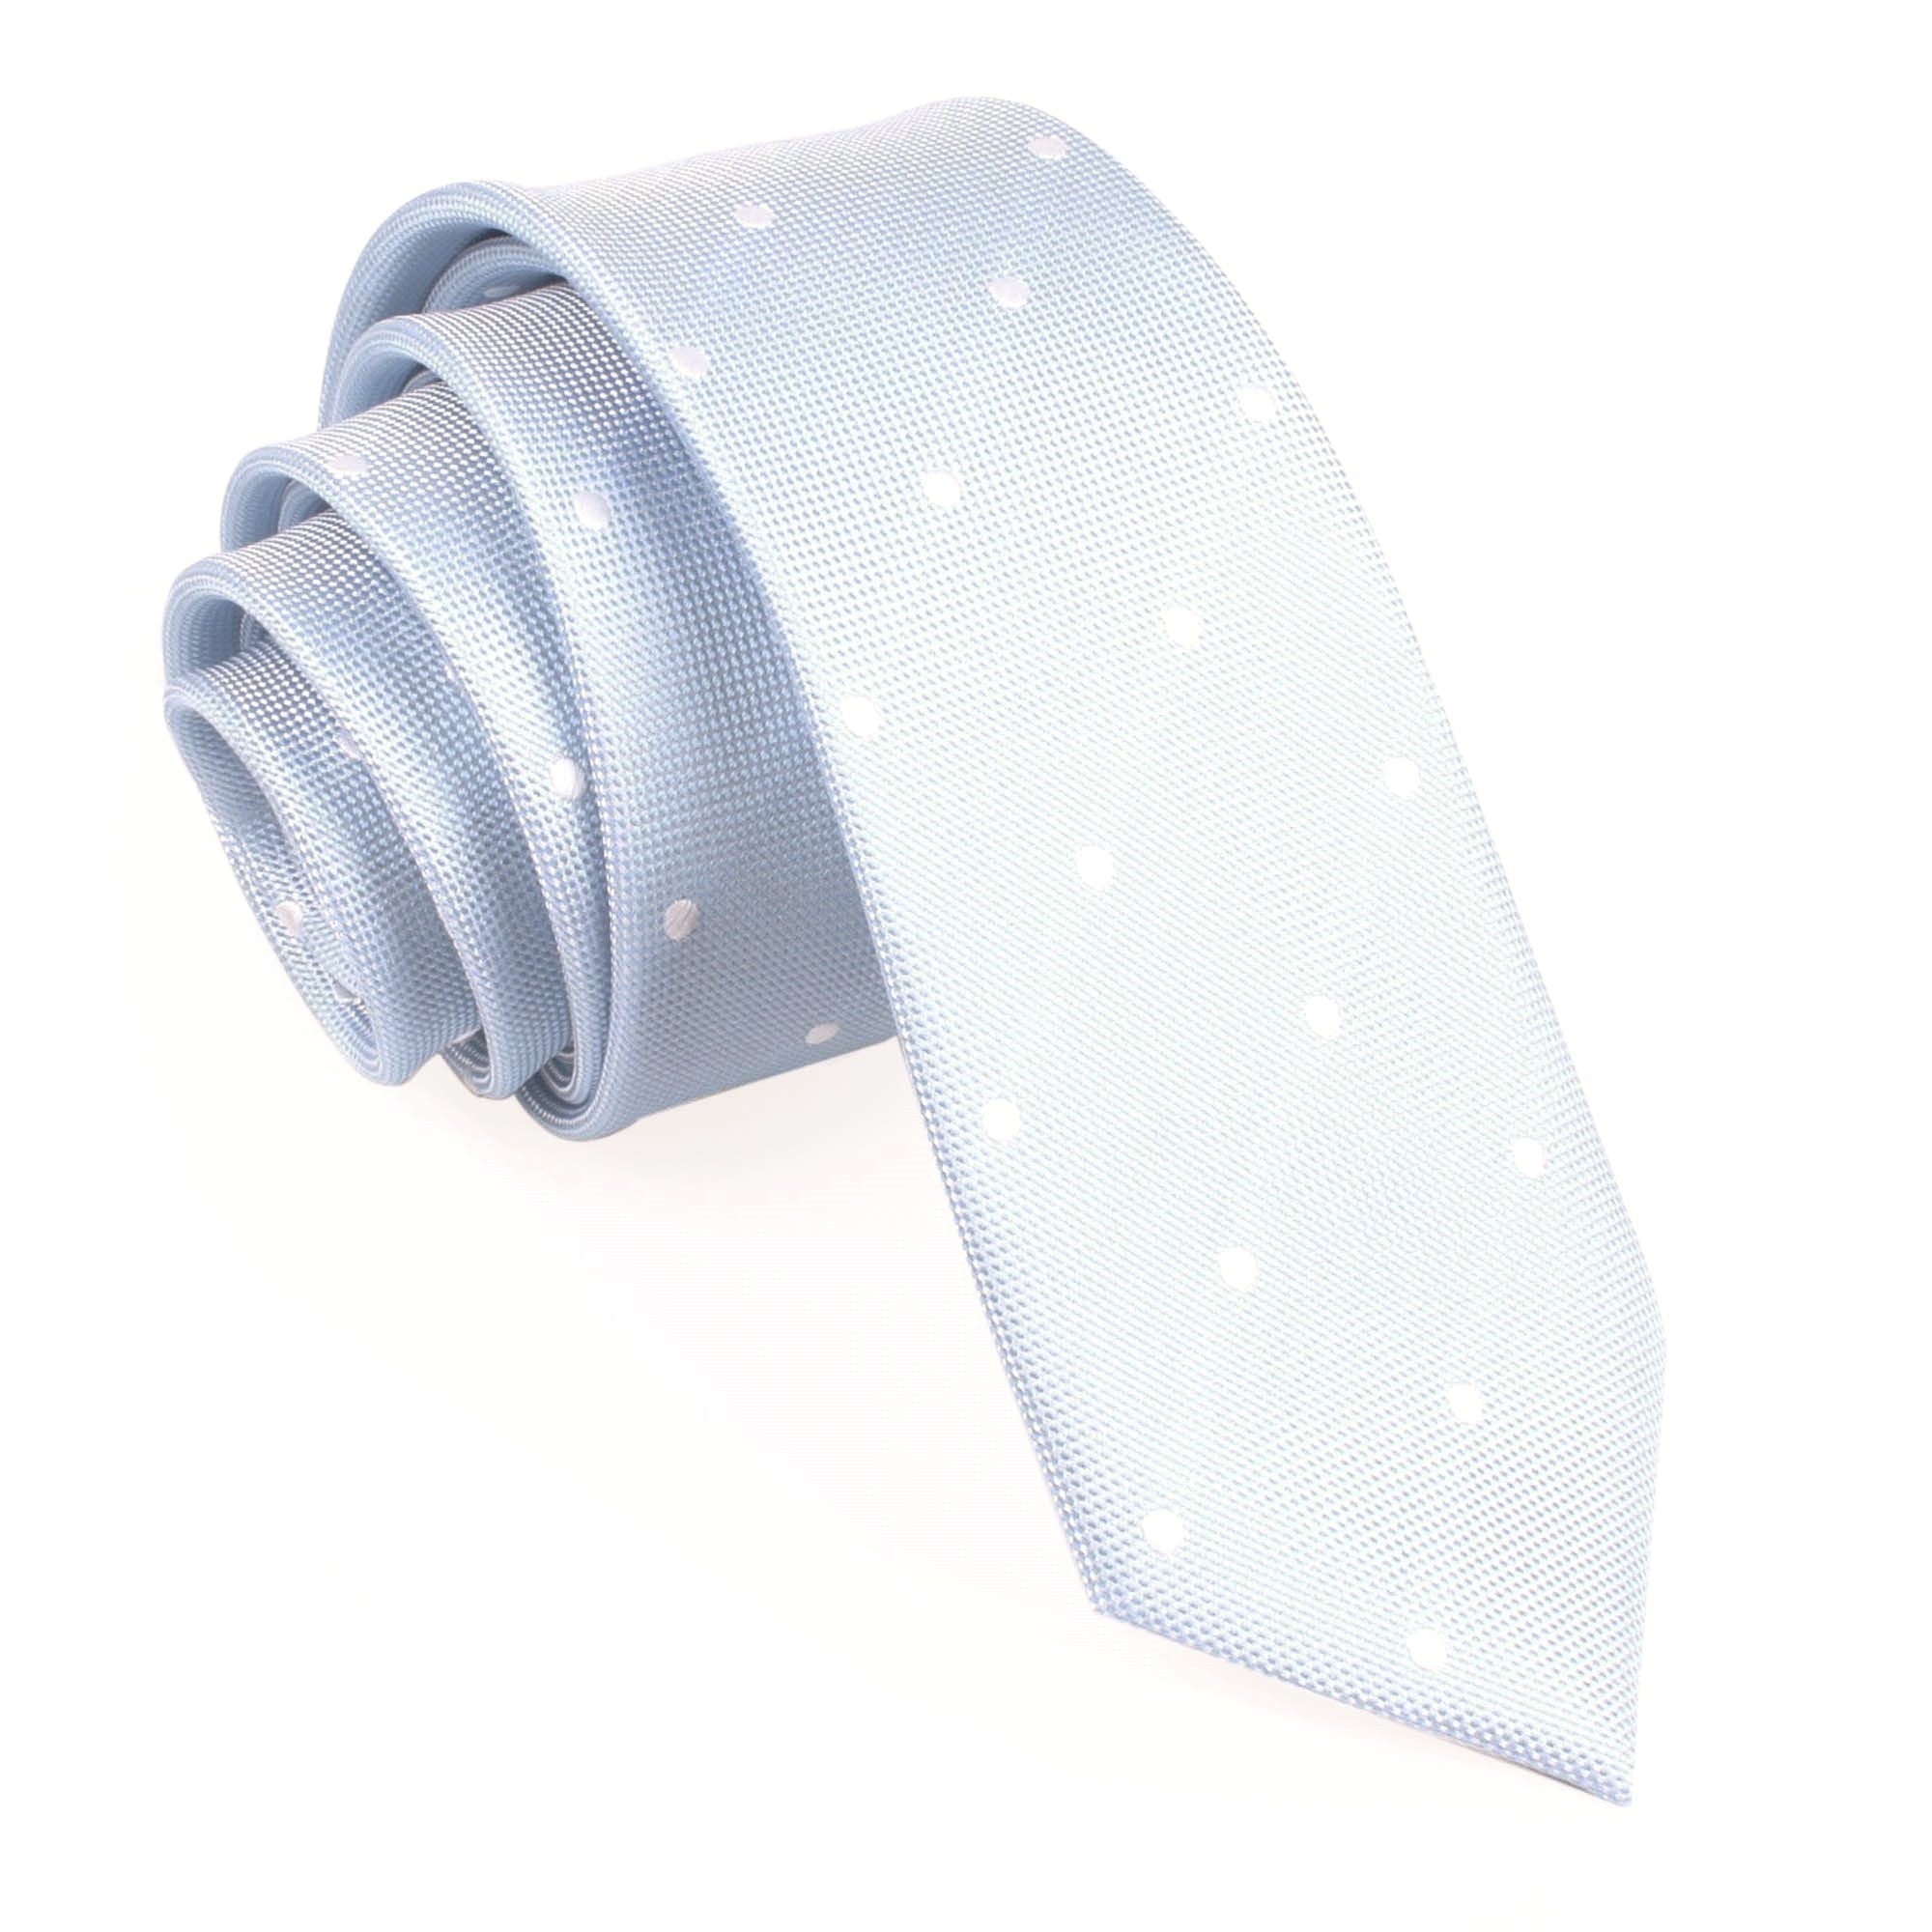 Mint Blue with White Polka Dots Skinny Tie